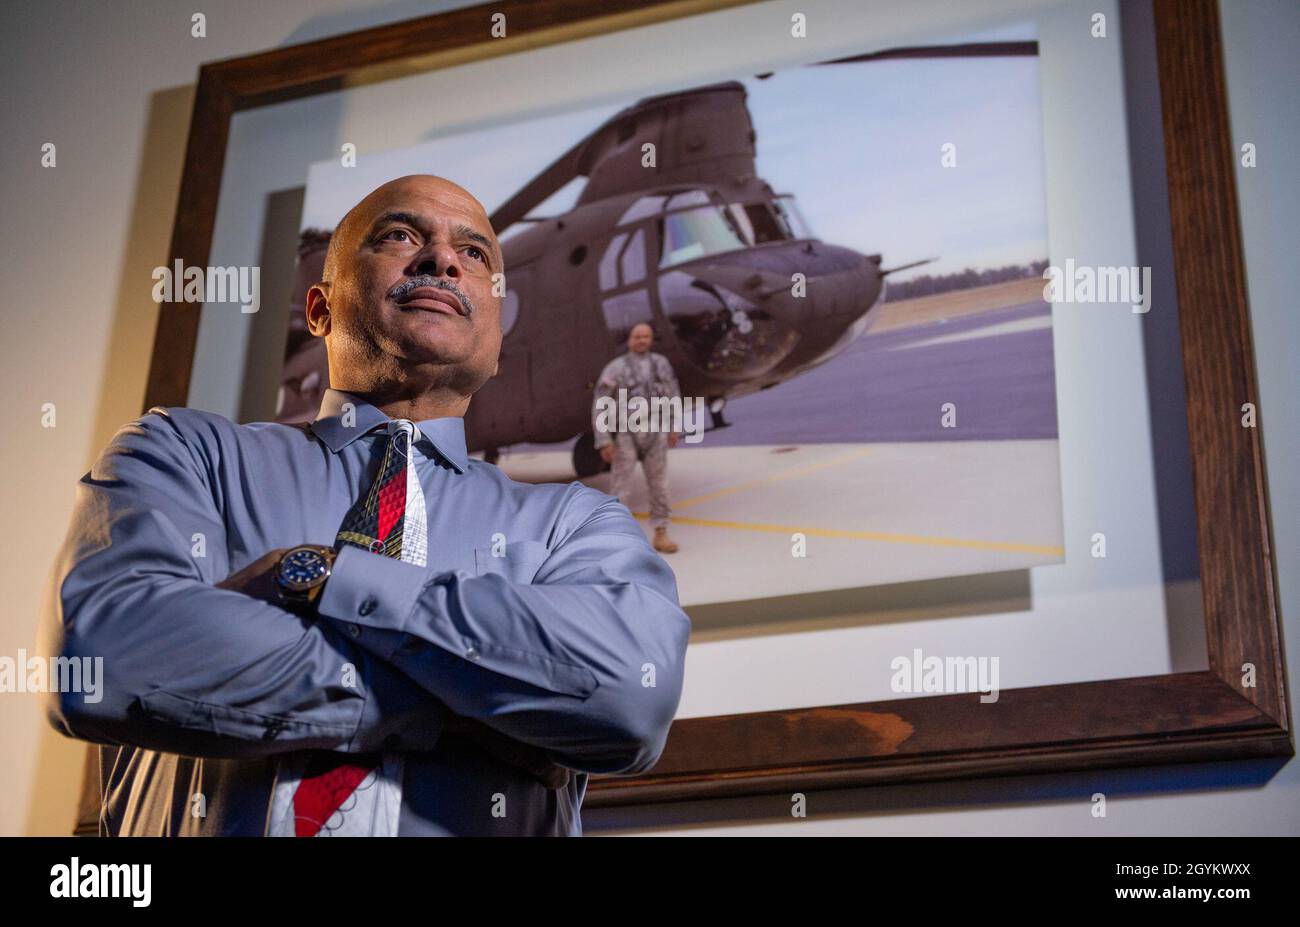 Phillip Brashear, a weapons system manager for the Defense Logistics Agency and a U.S. Army Reserve warrant officer, poses next to a picture of him with a CH-47D Chinook helicopter he flew for the Army, at his job in Richmond, Virginia, Jan. 23, 2020. Phillip Brasher is the son of Carl Brashear, the first African-American master diver in U.S. Navy’s history who lost his leg during a tragic accident on a diver mission off the coast of Spain in 1966. Carl Brashear’s life story about overcoming physical and racial adversity was featured in the Hollywood film “Men of Honor” starring Cuba Gooding J Stock Photo